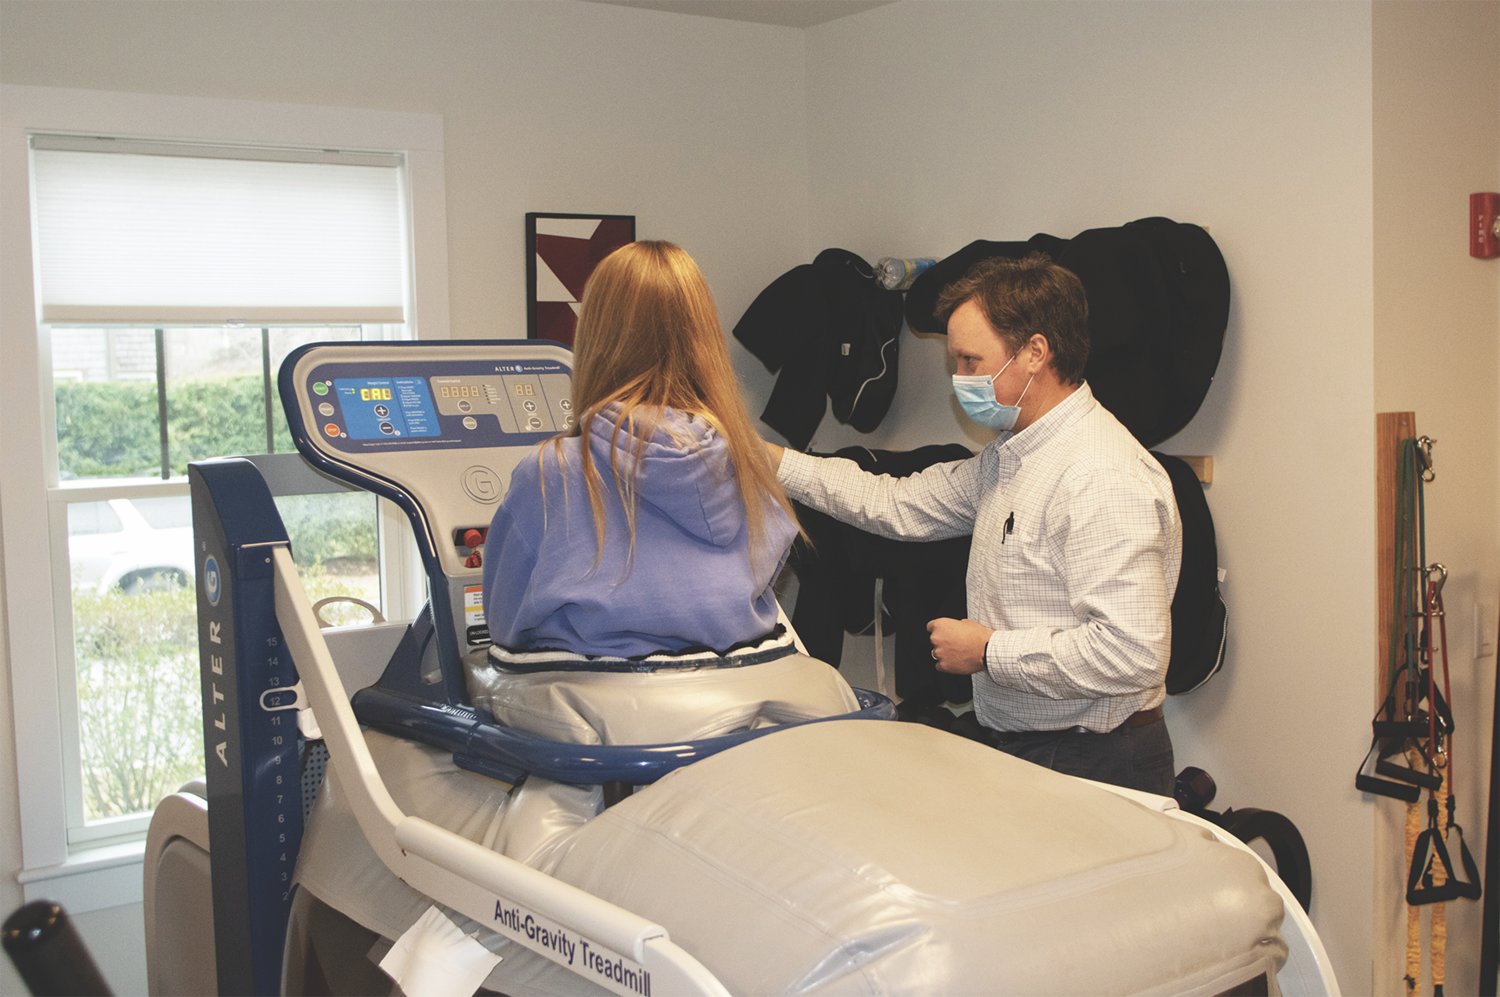 Joe Manning works with a client on the anti-gravity treadmill in his Amelia Drive office.